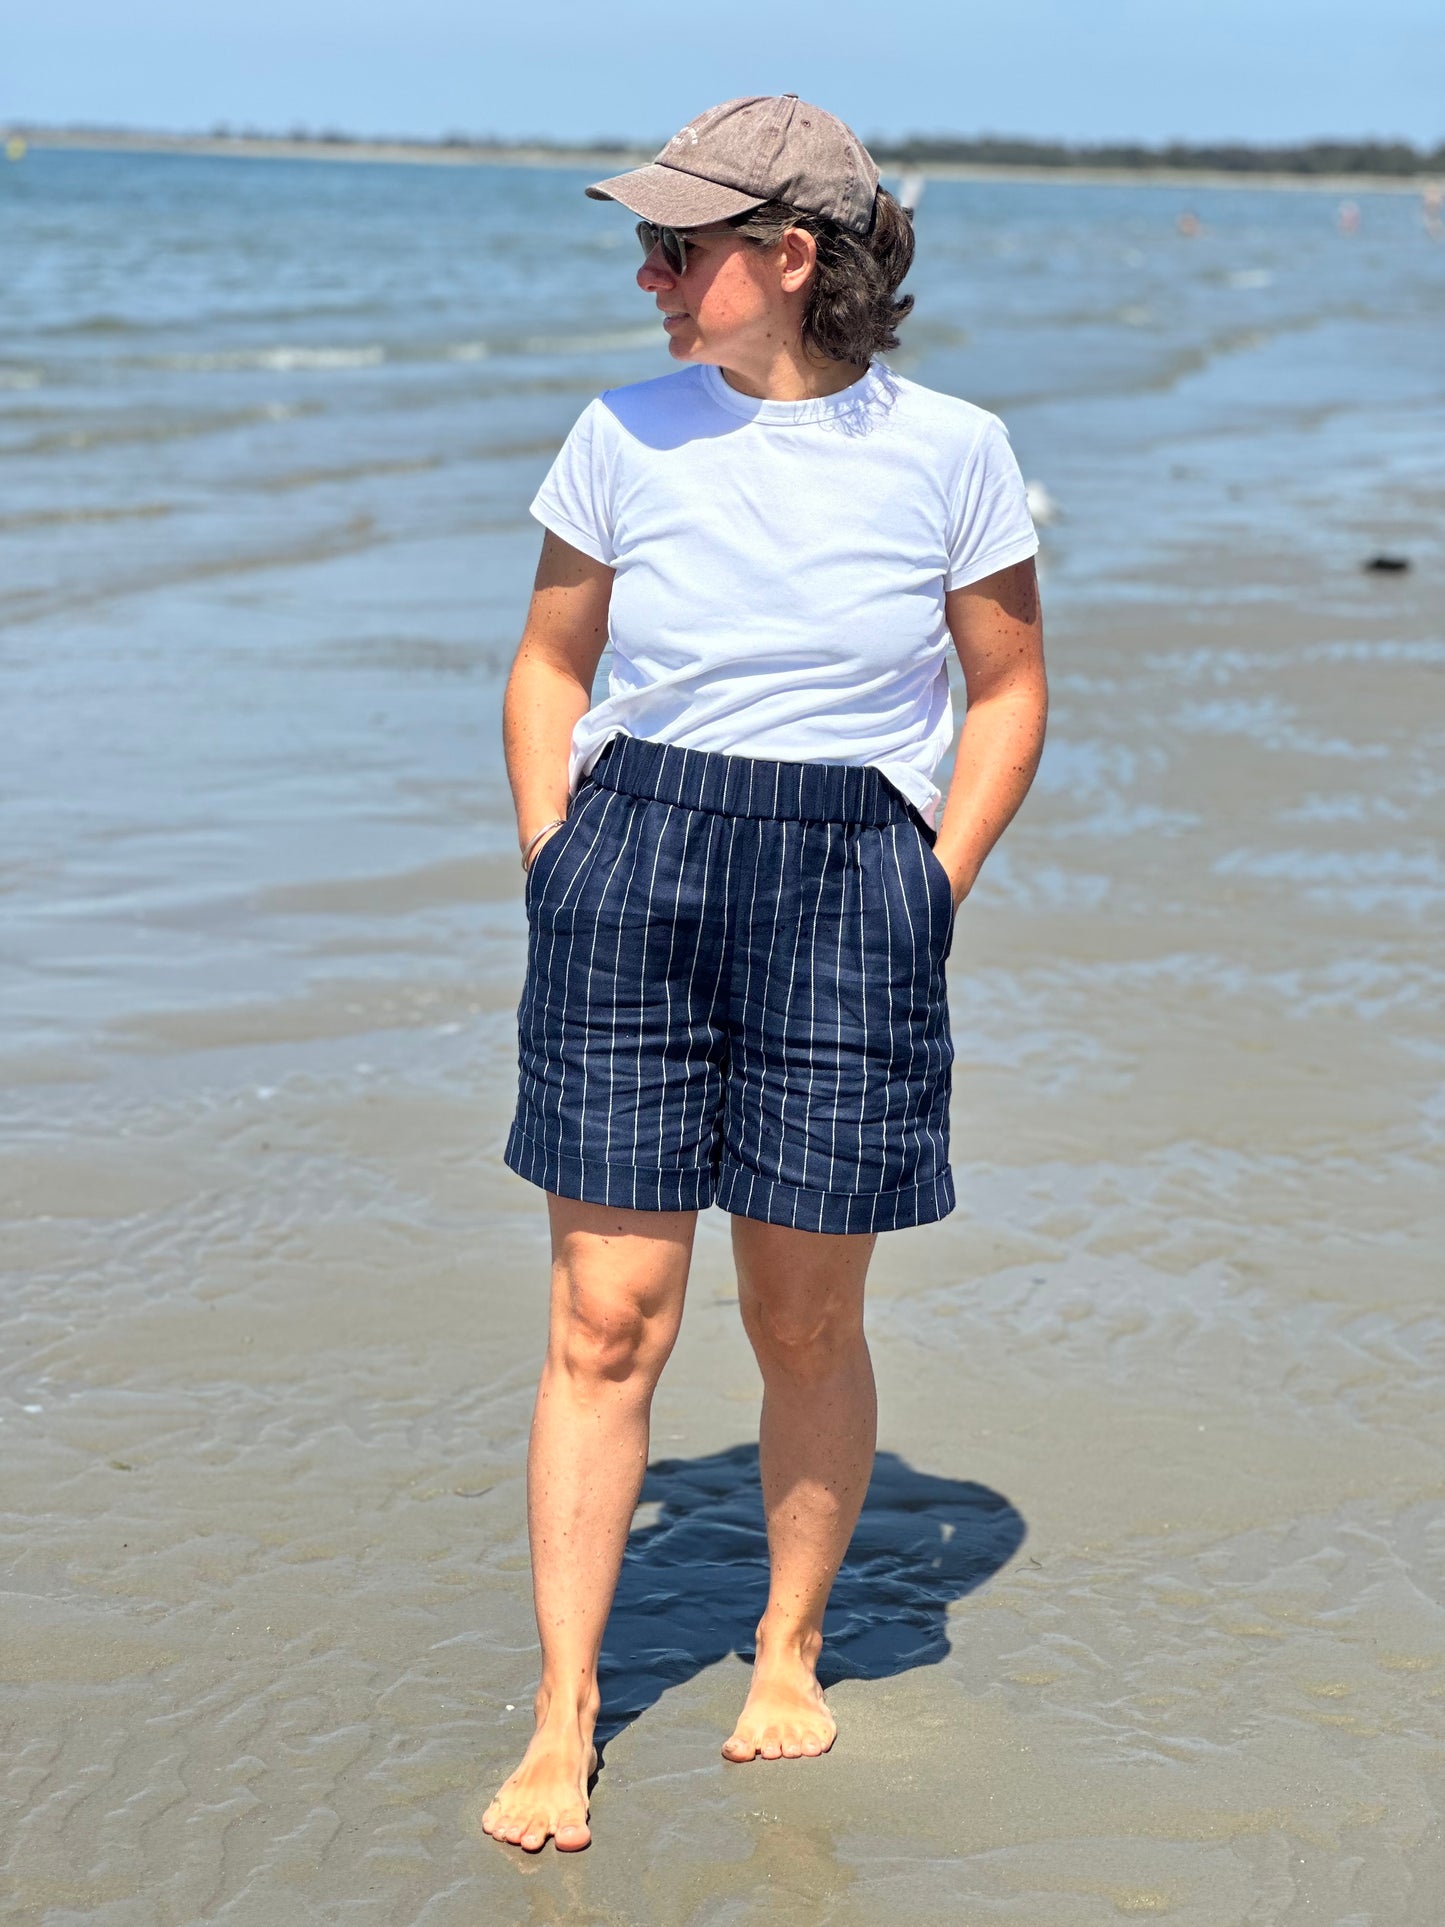 MARLO High waisted everyday shorts PDF Sewing Pattern